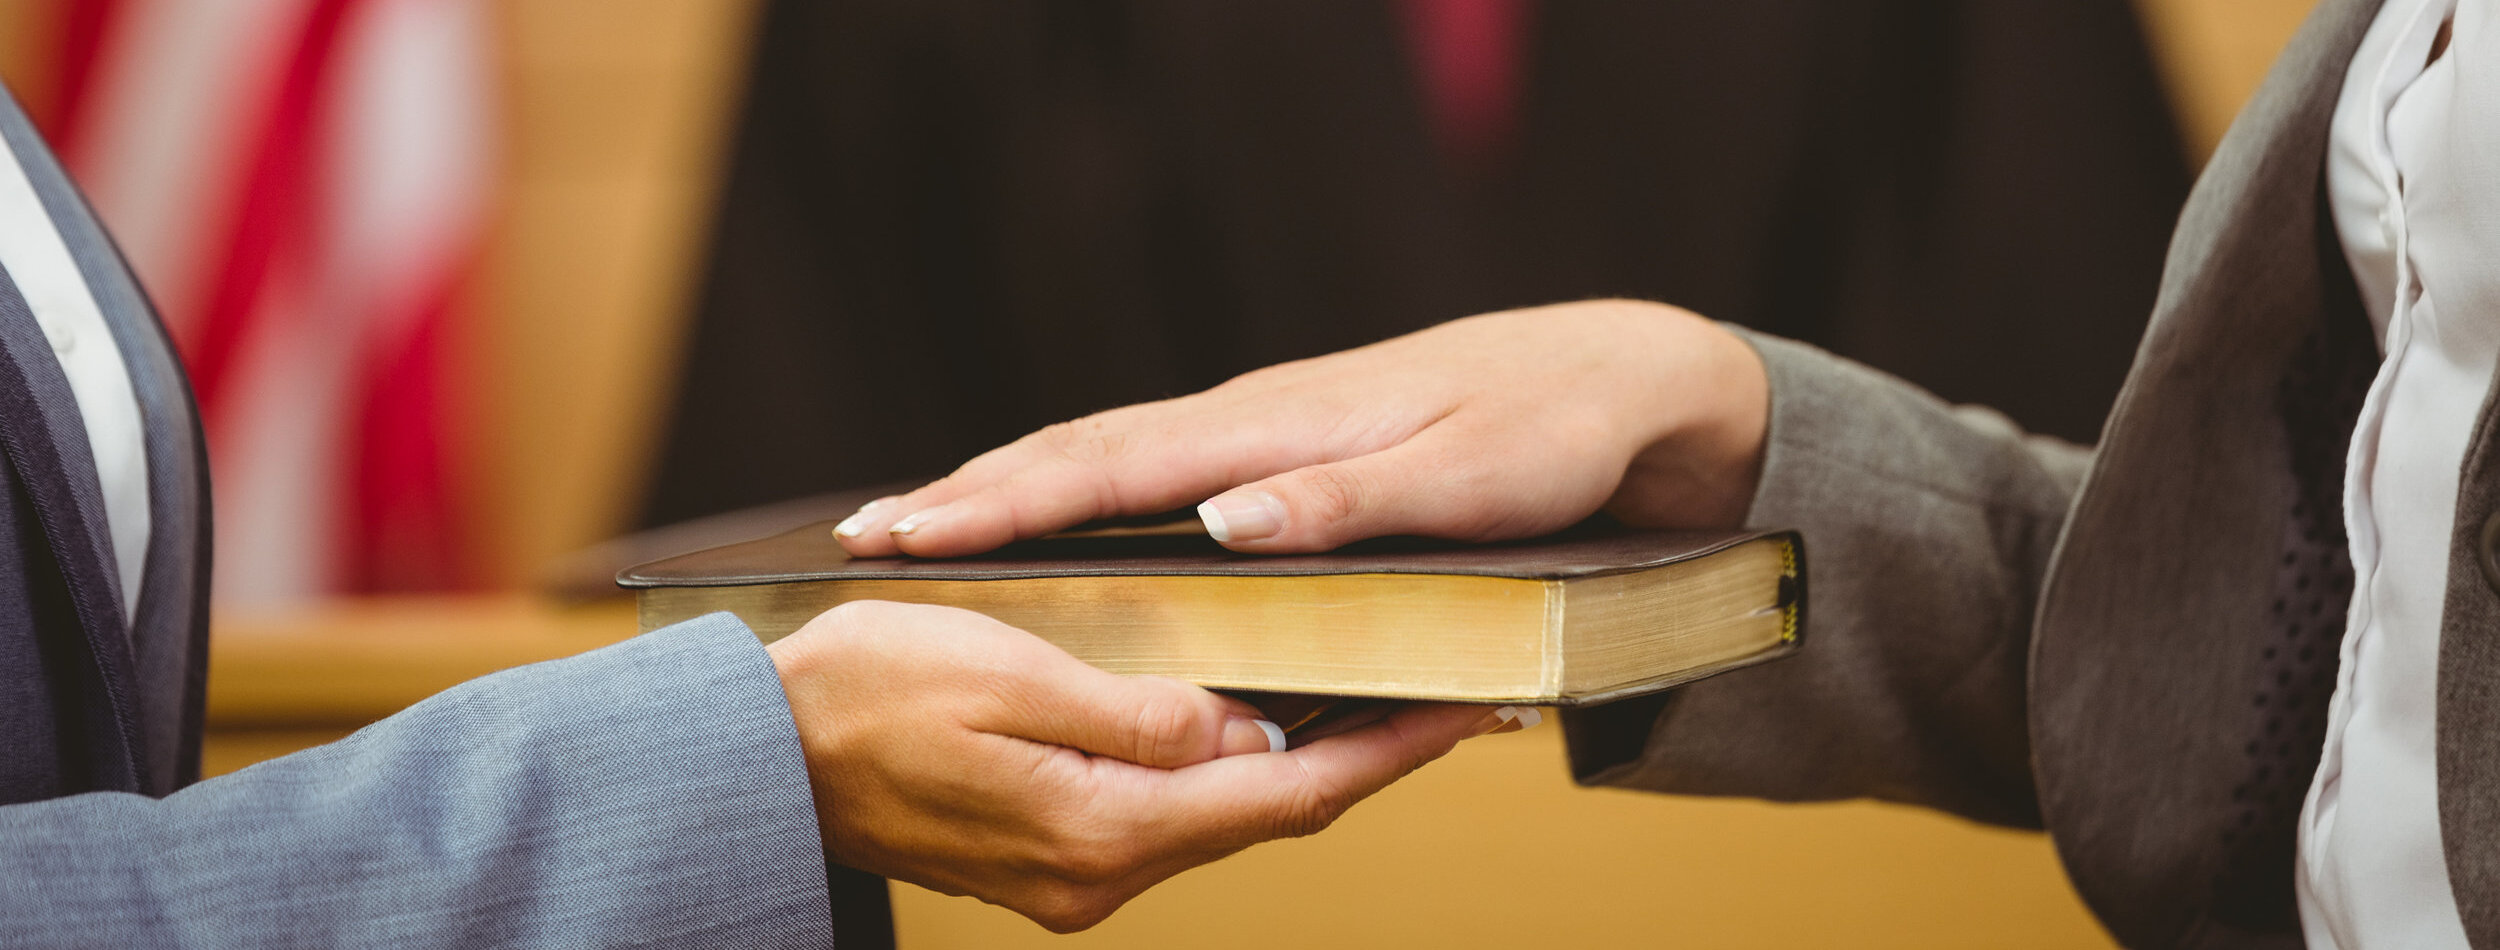 Witness swearing on the bible telling the truth in the court room